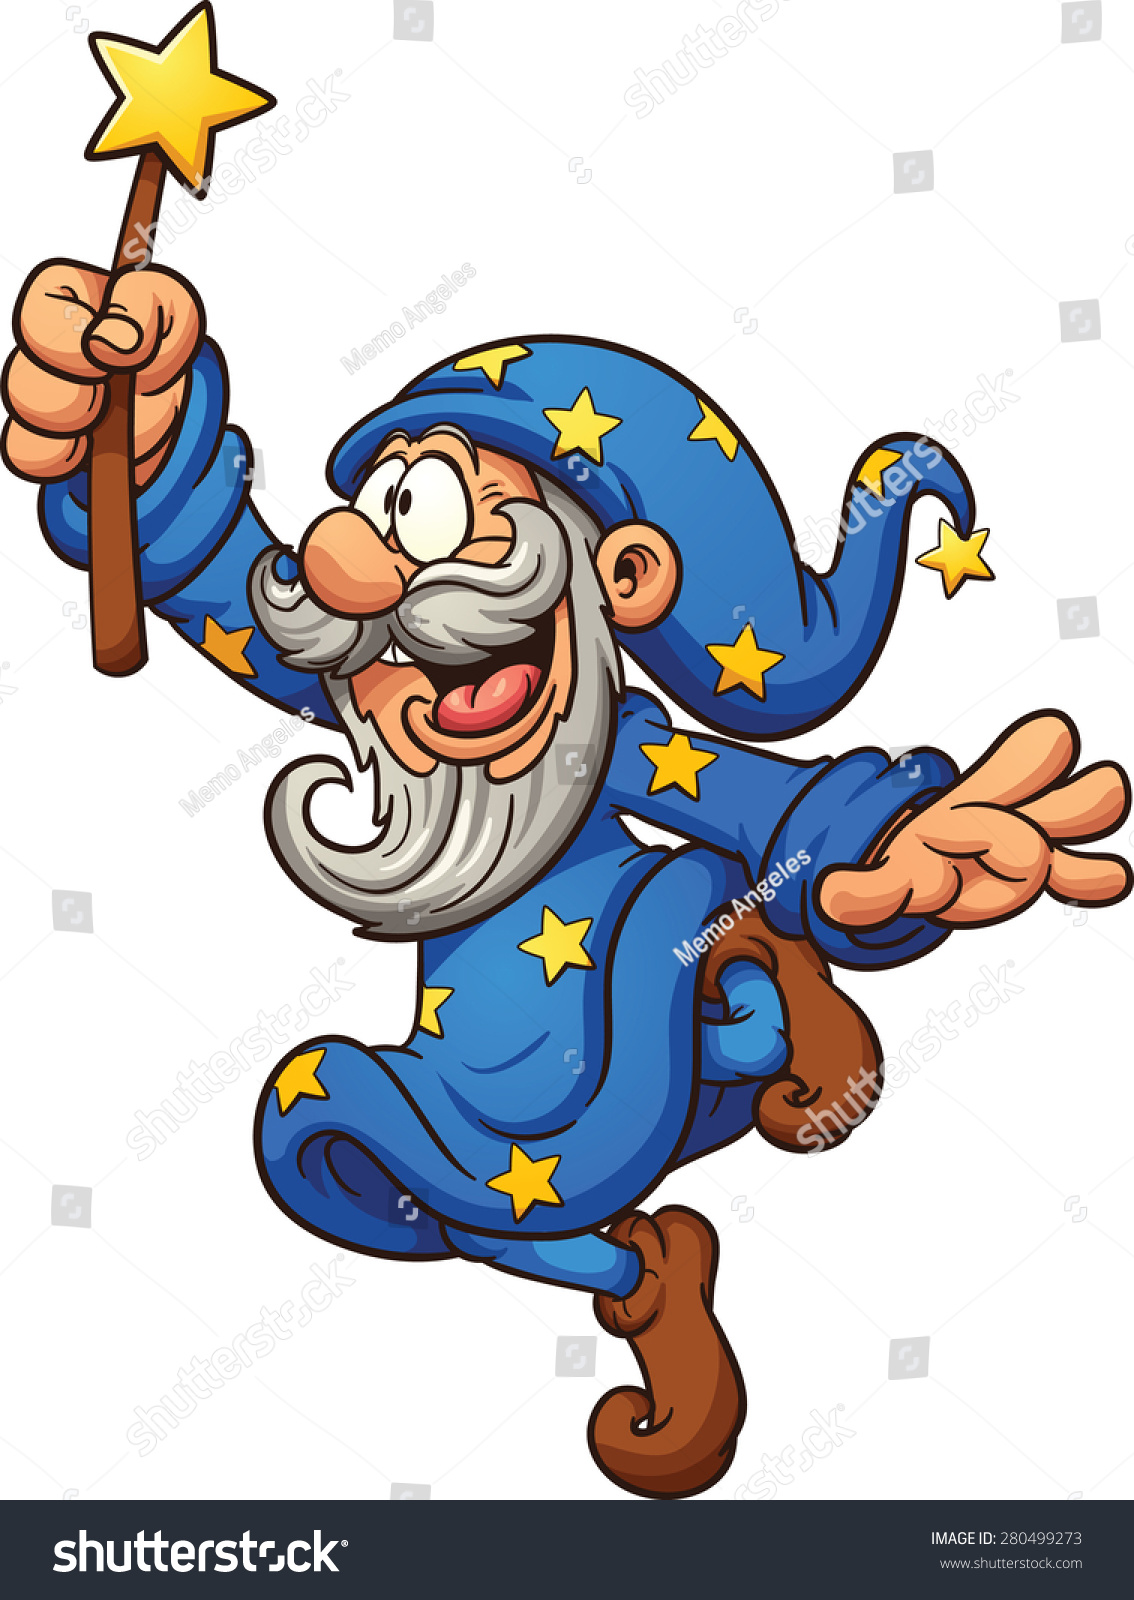 Cartoon Wizard With Magic Wand. Vector Clip Art Illustration With ...